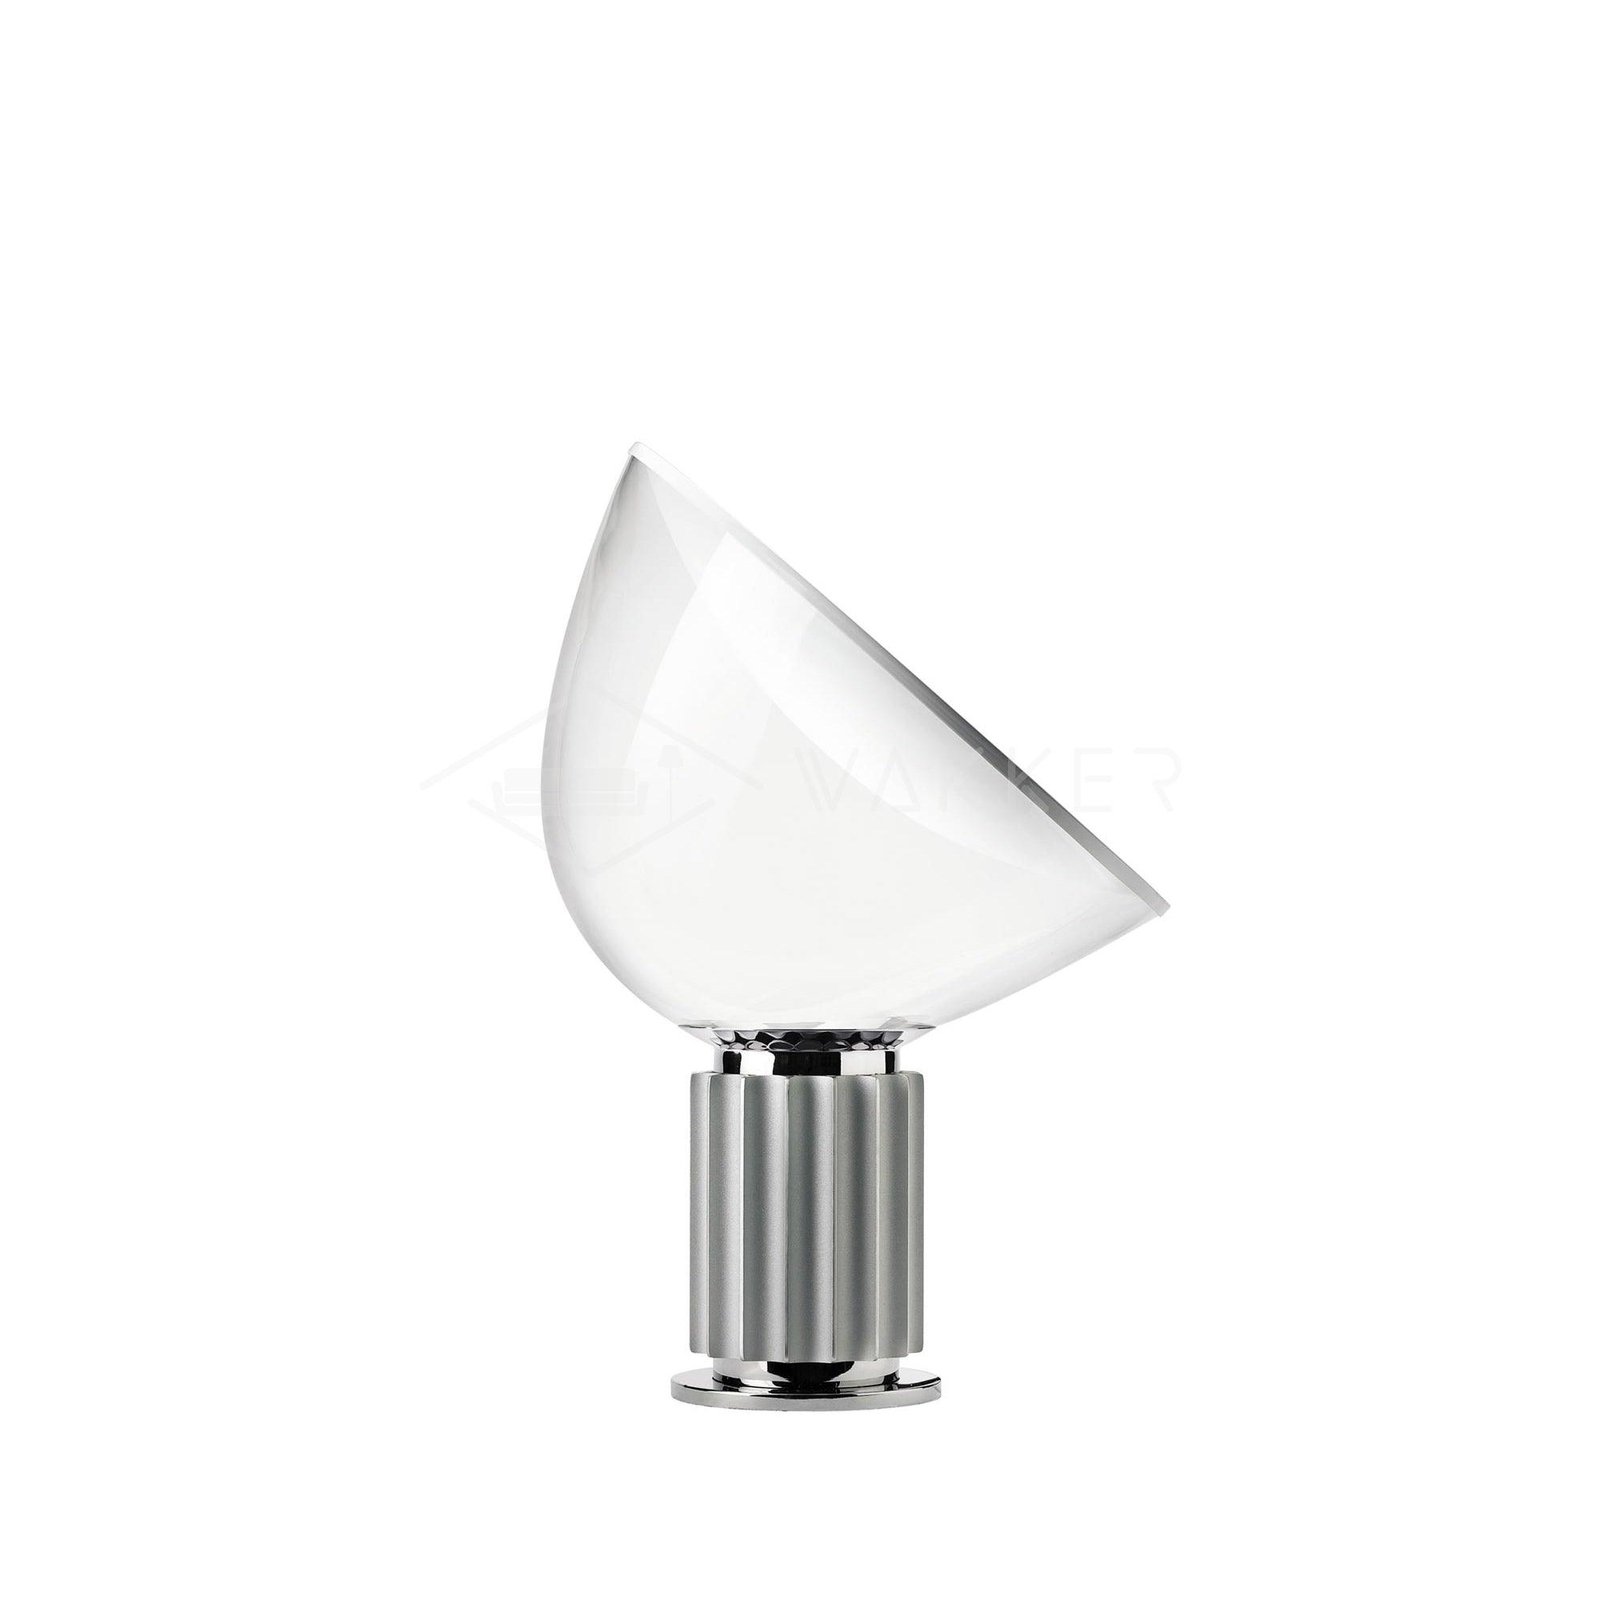 Silver Taccia Table Lamp with AU Plug, Measurements: Diameter 19.5 inches x Height 25.4 inches (49.5cm x 64.5cm)